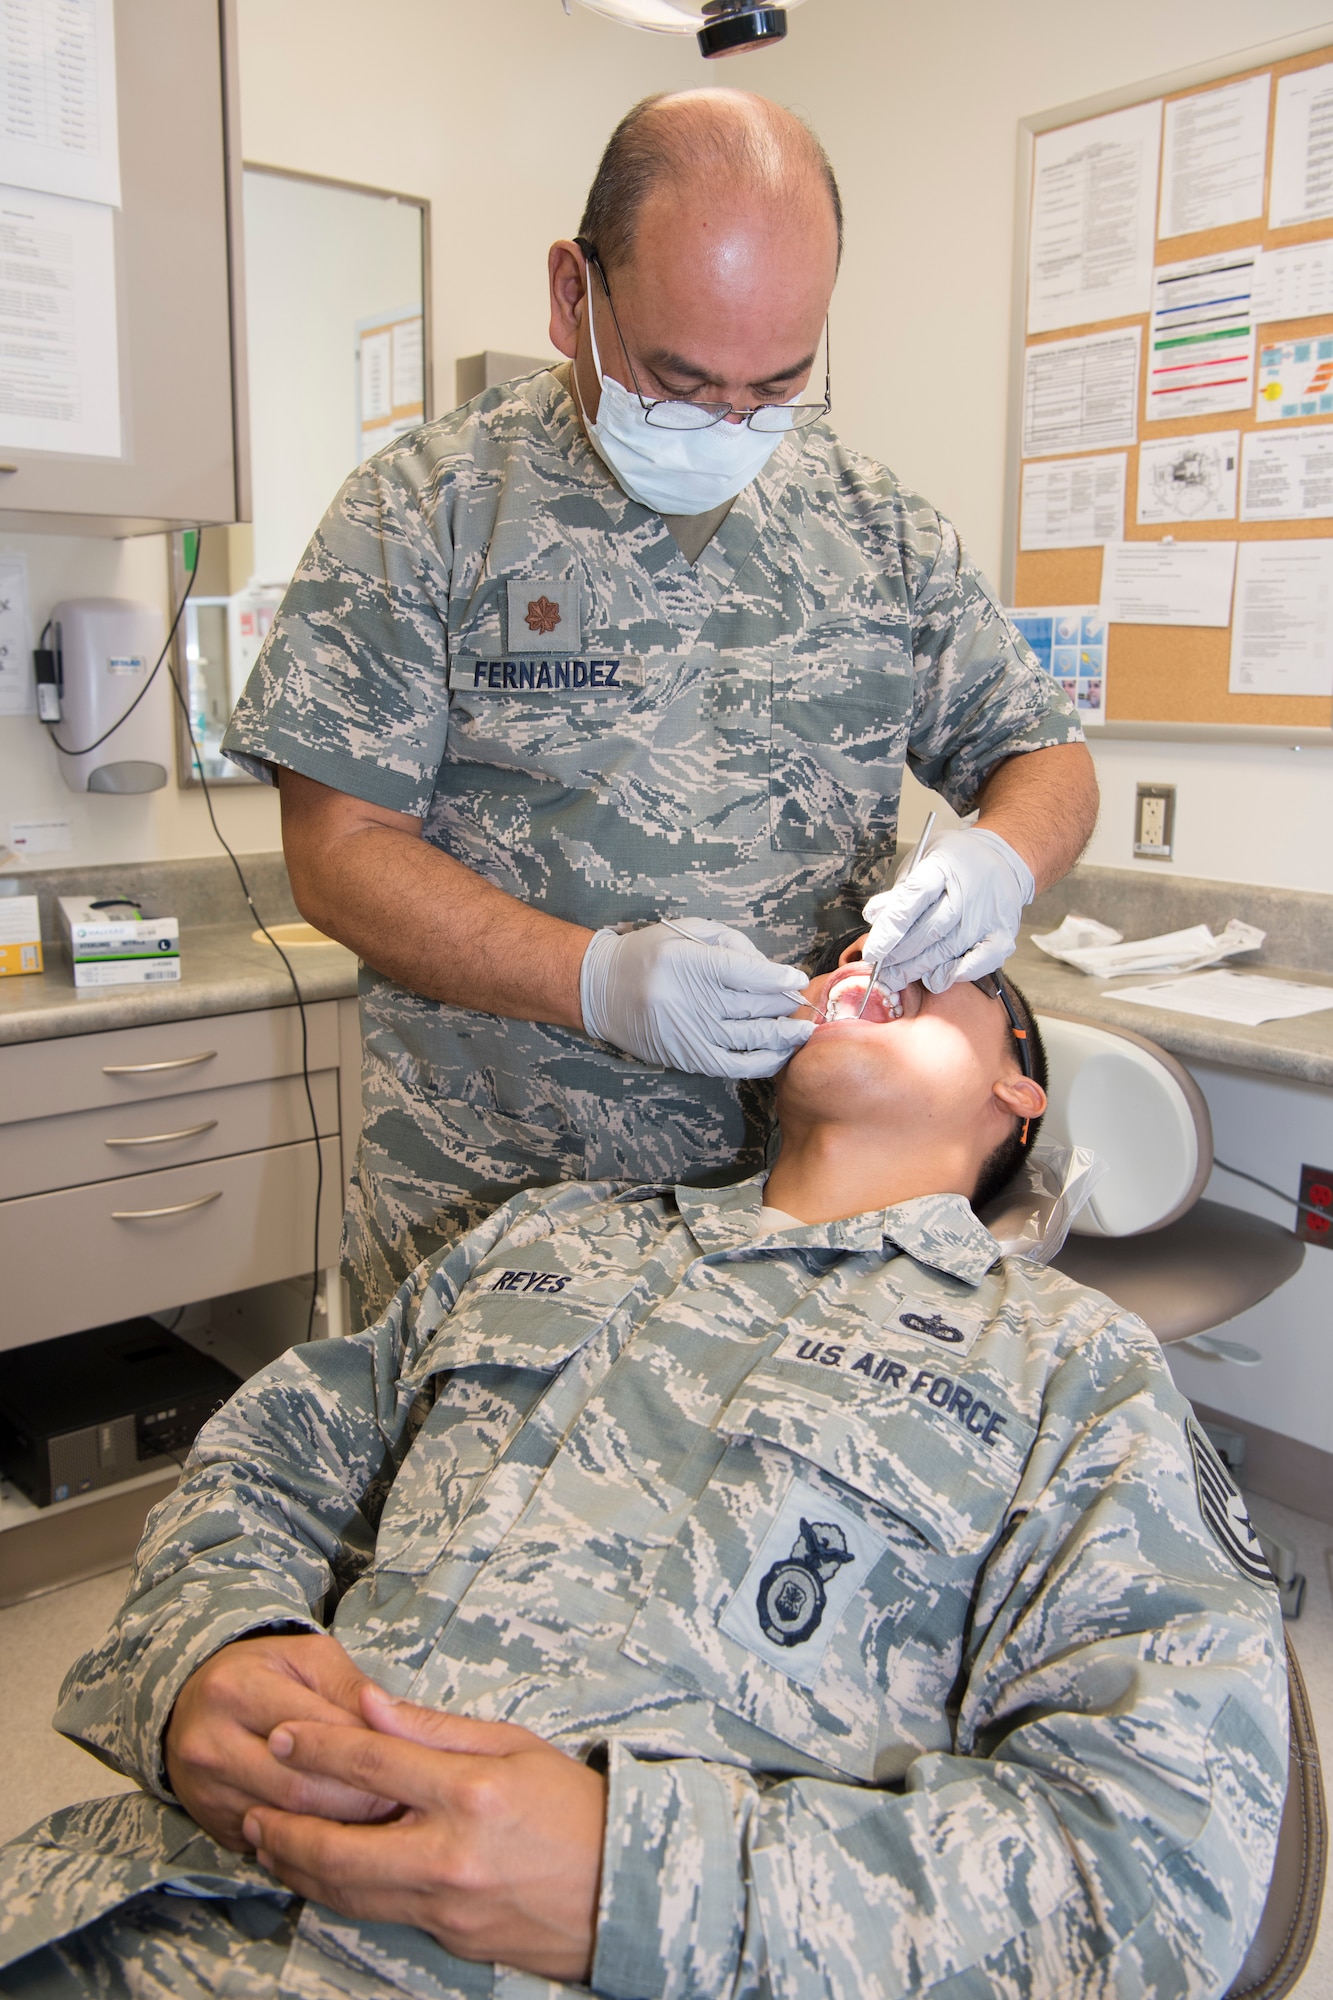 U.S. Air Force Maj. Michael Fernandez, Air Force Reserve’s 624th Aerospace Medicine Flight chief dentist, conducts a dental exam for Tech. Sgt. Joshua Reyes, Air National Guard’s 254th Security Forces Squadron craftsman, as part of individual medical readiness requirements during a unit training assembly at Andersen Air Force Base, Guam, June 3, 2018.